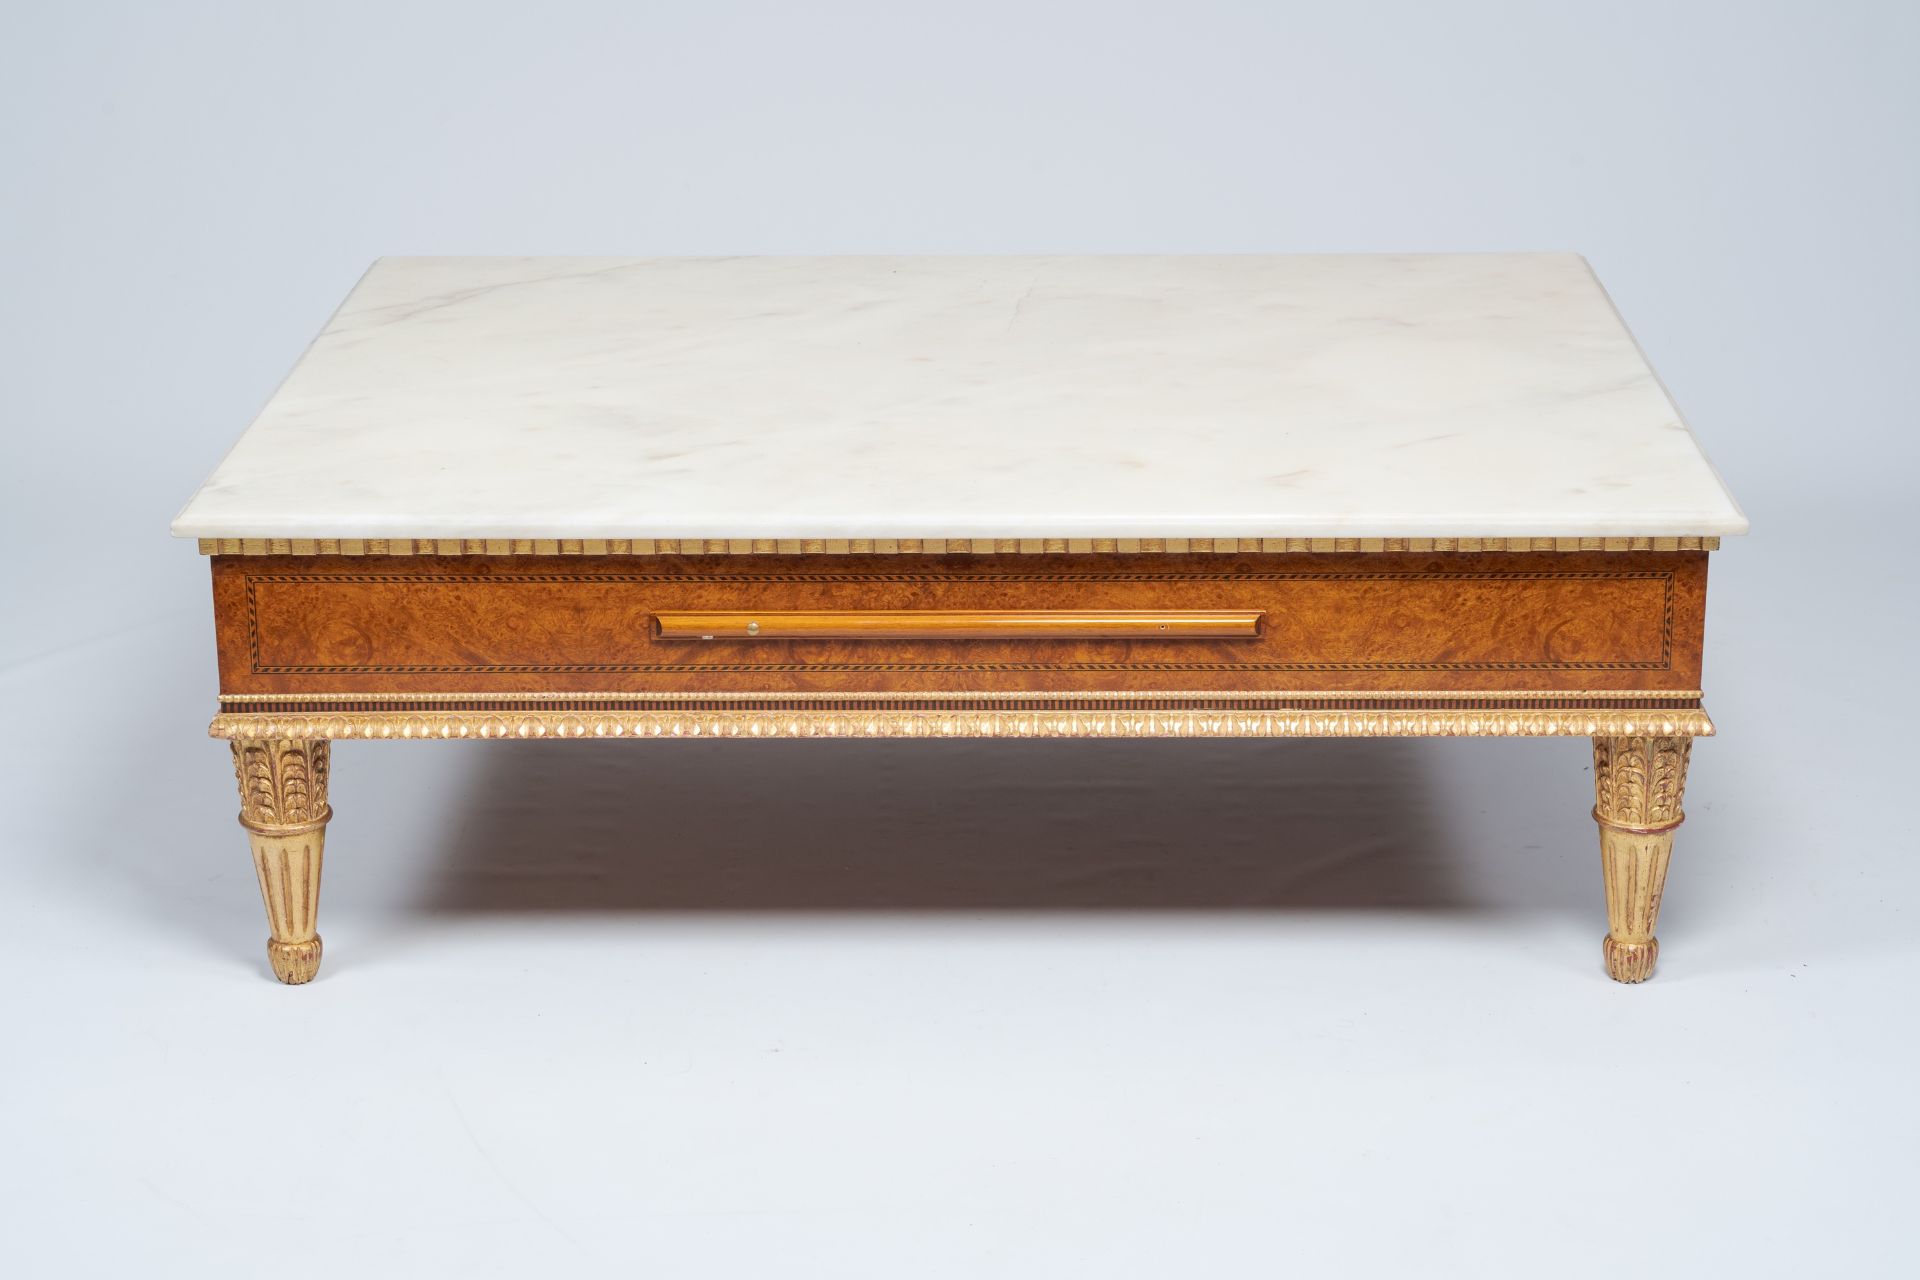 A Neoclassical partly gilt wood coffee table with marble top and four extendable plateaus, 20th C. - Image 3 of 8